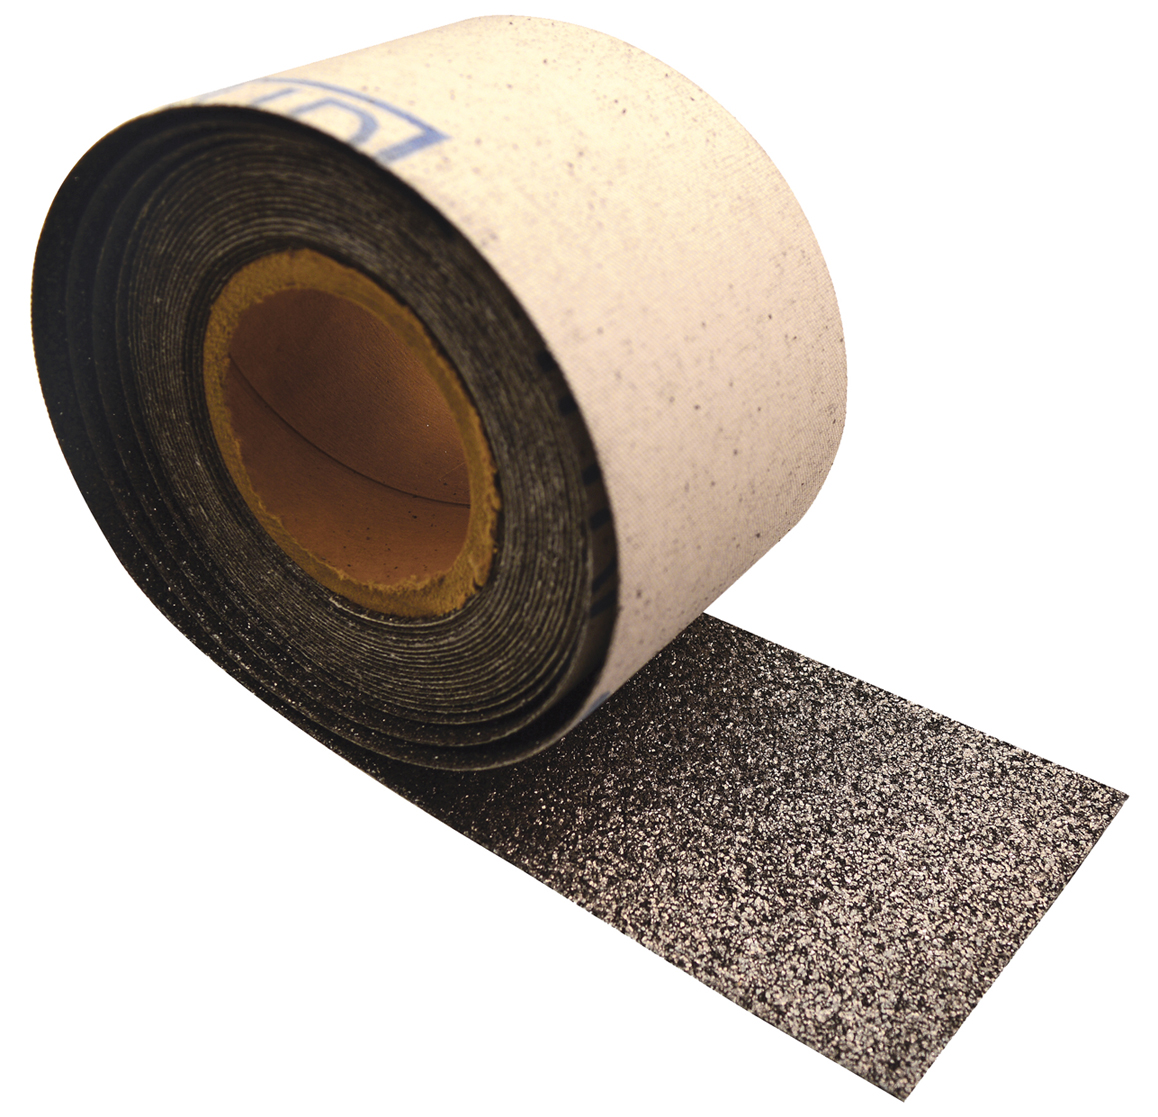 2 HEAVY DUTY GRAPHITE COATED CANVAS ROLL